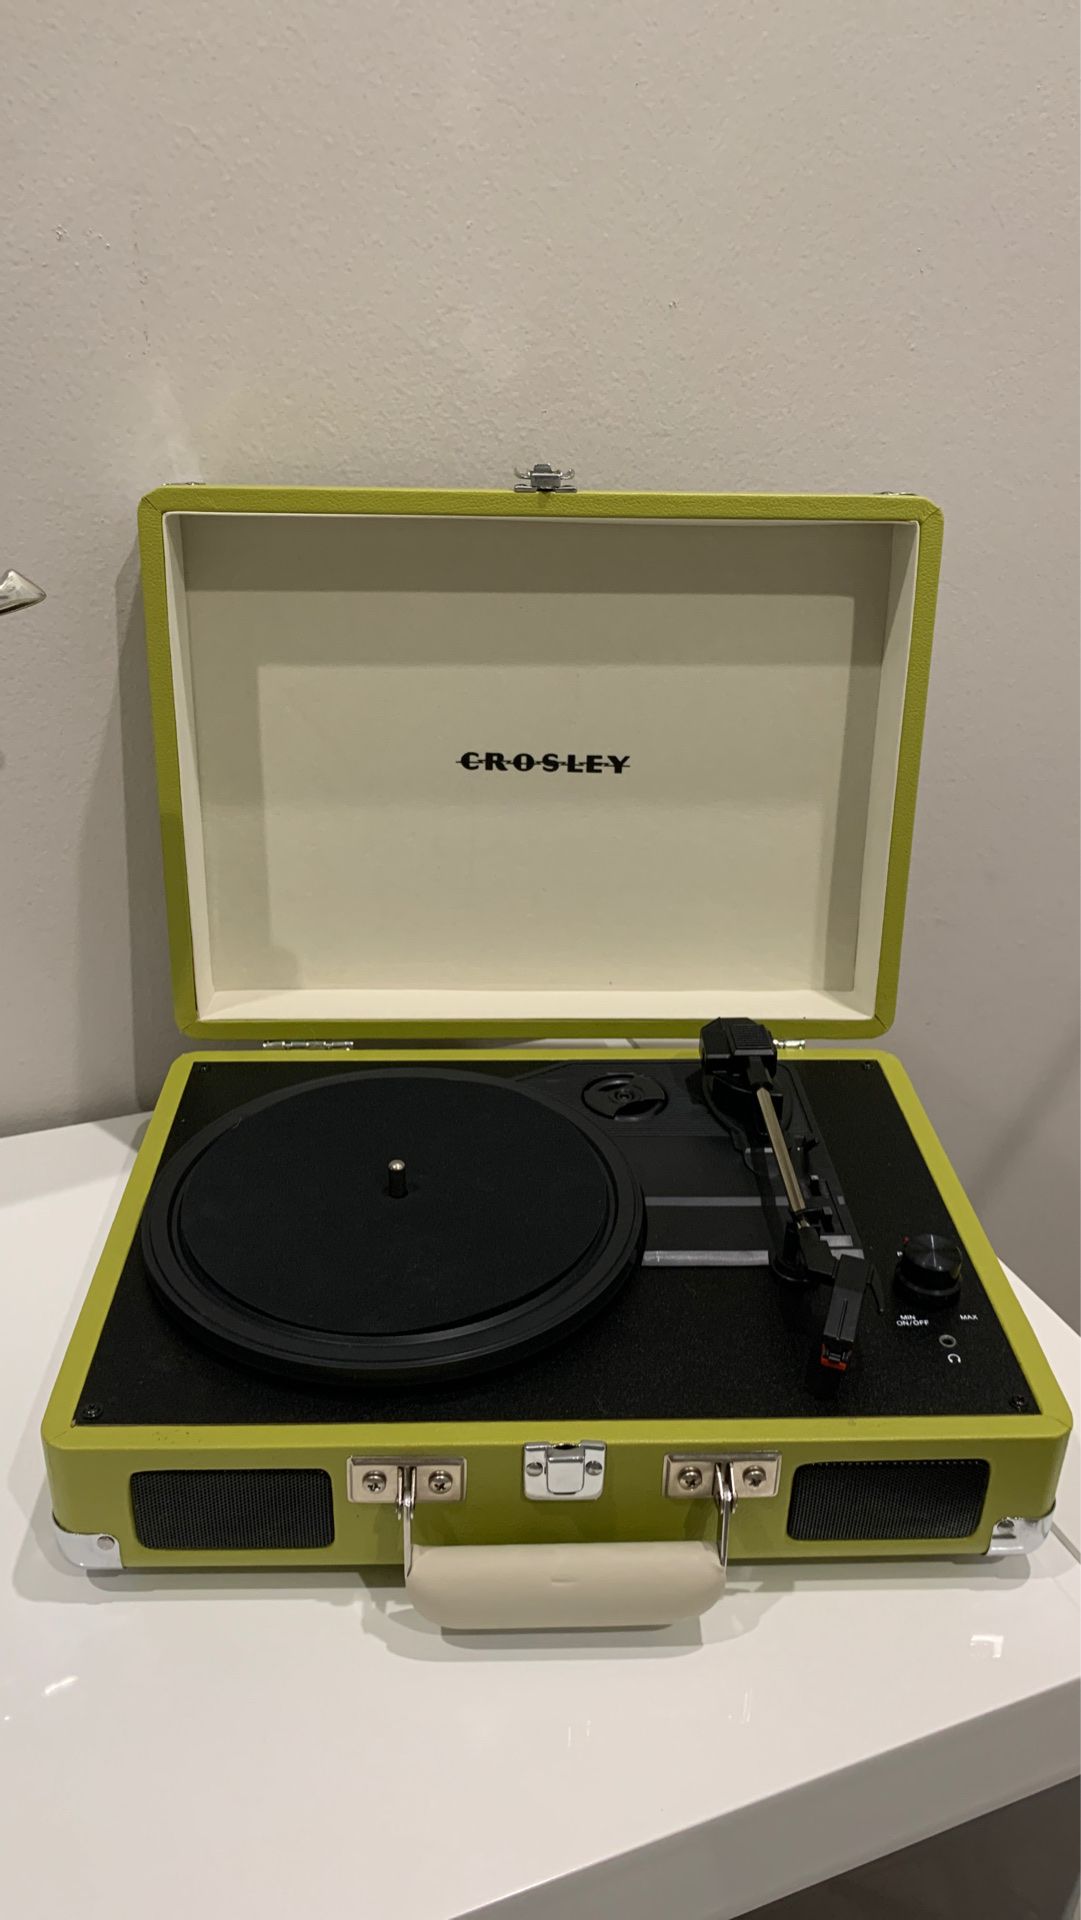 Crosley lime green record player